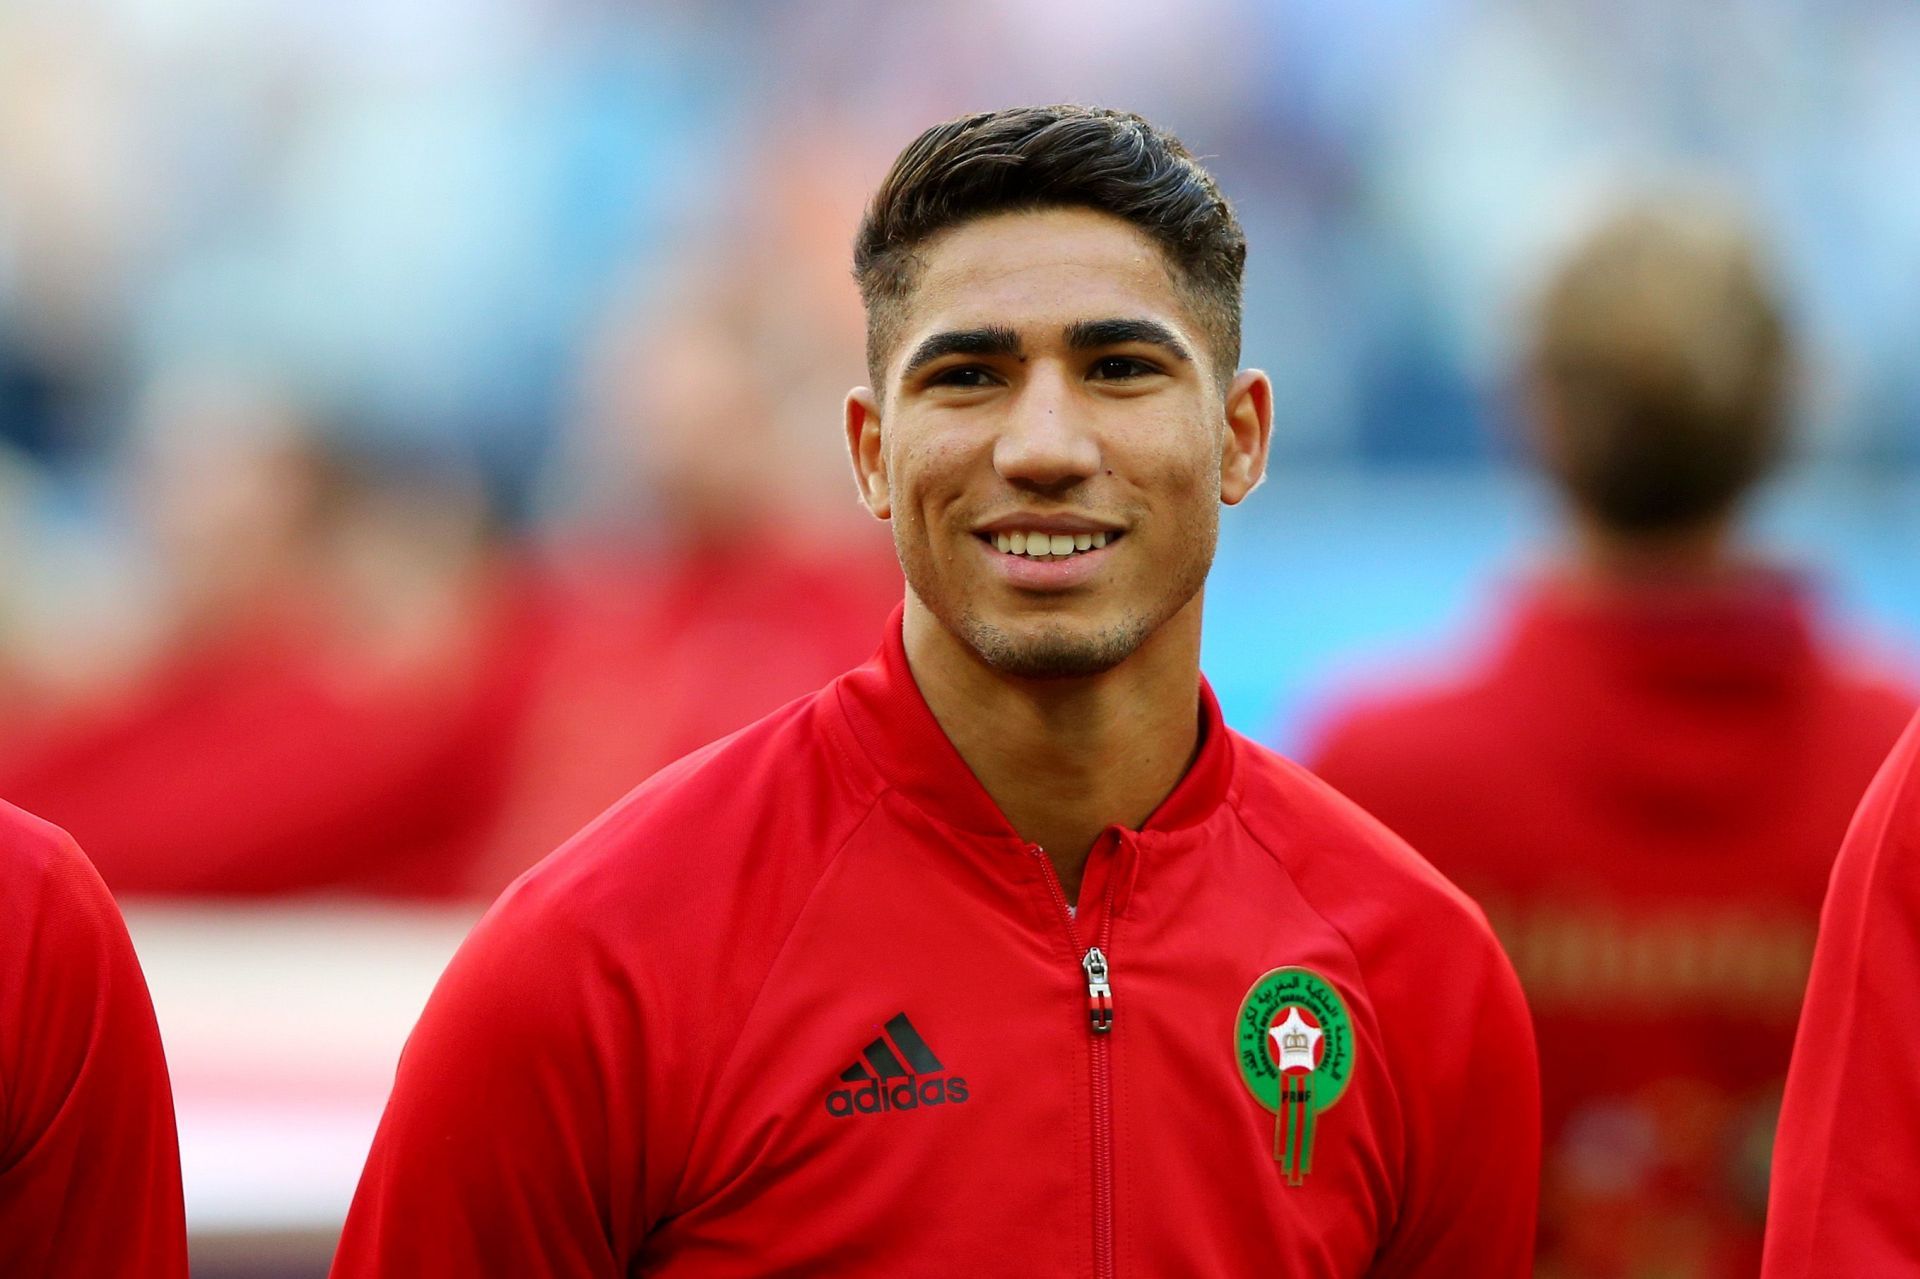 Morocco star Achraf Hakimi is one of those who will look to light up AFCON